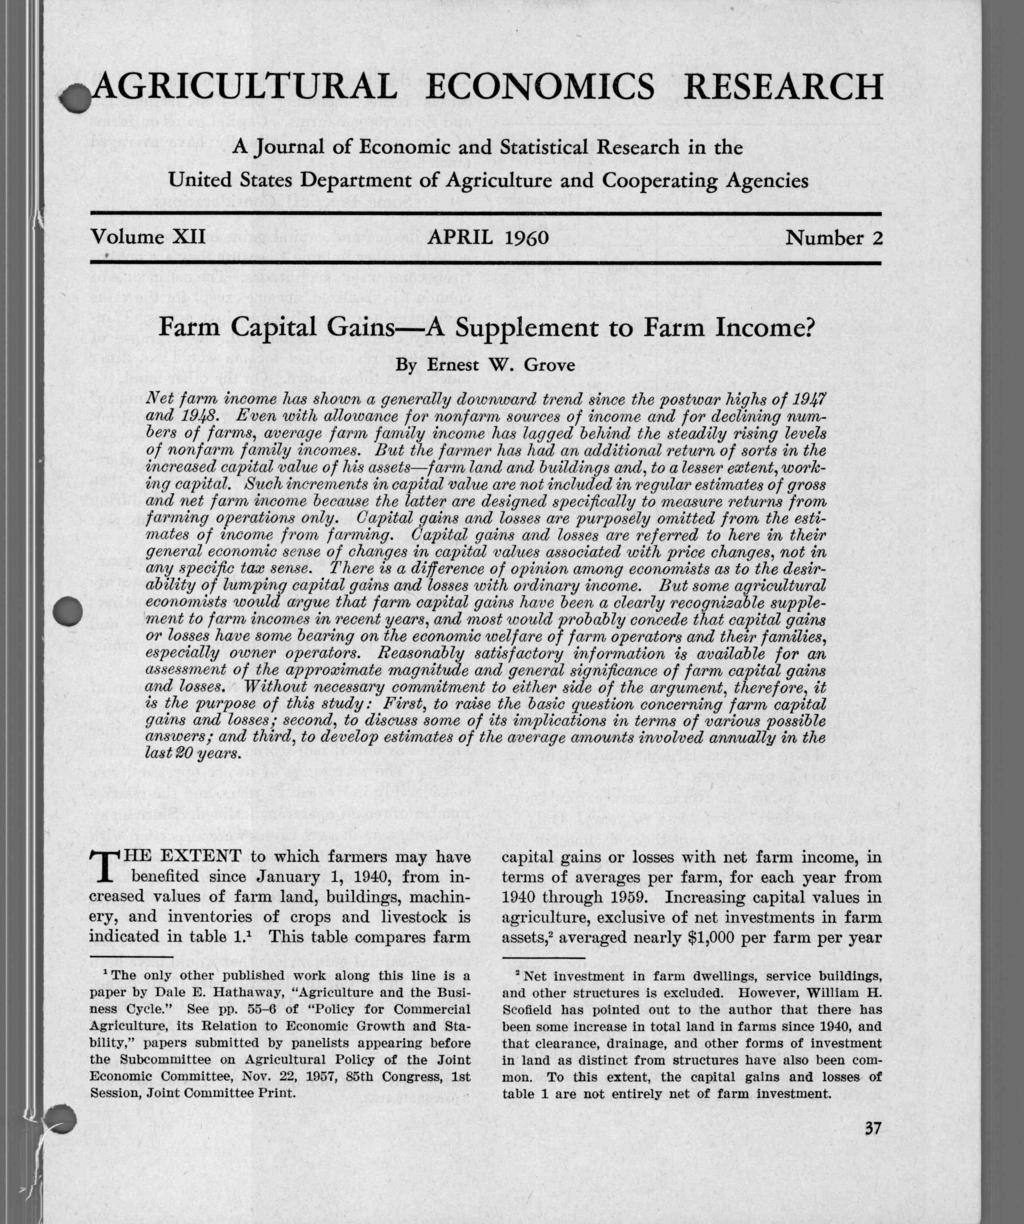 AGRICULTURAL ECONOMICS RESEARCH A Journal of Economic and Statistical Research in the United States Department of Agriculture and Cooperating Agencies Volume XII APRIL 1960 Number 2 Farm Capital